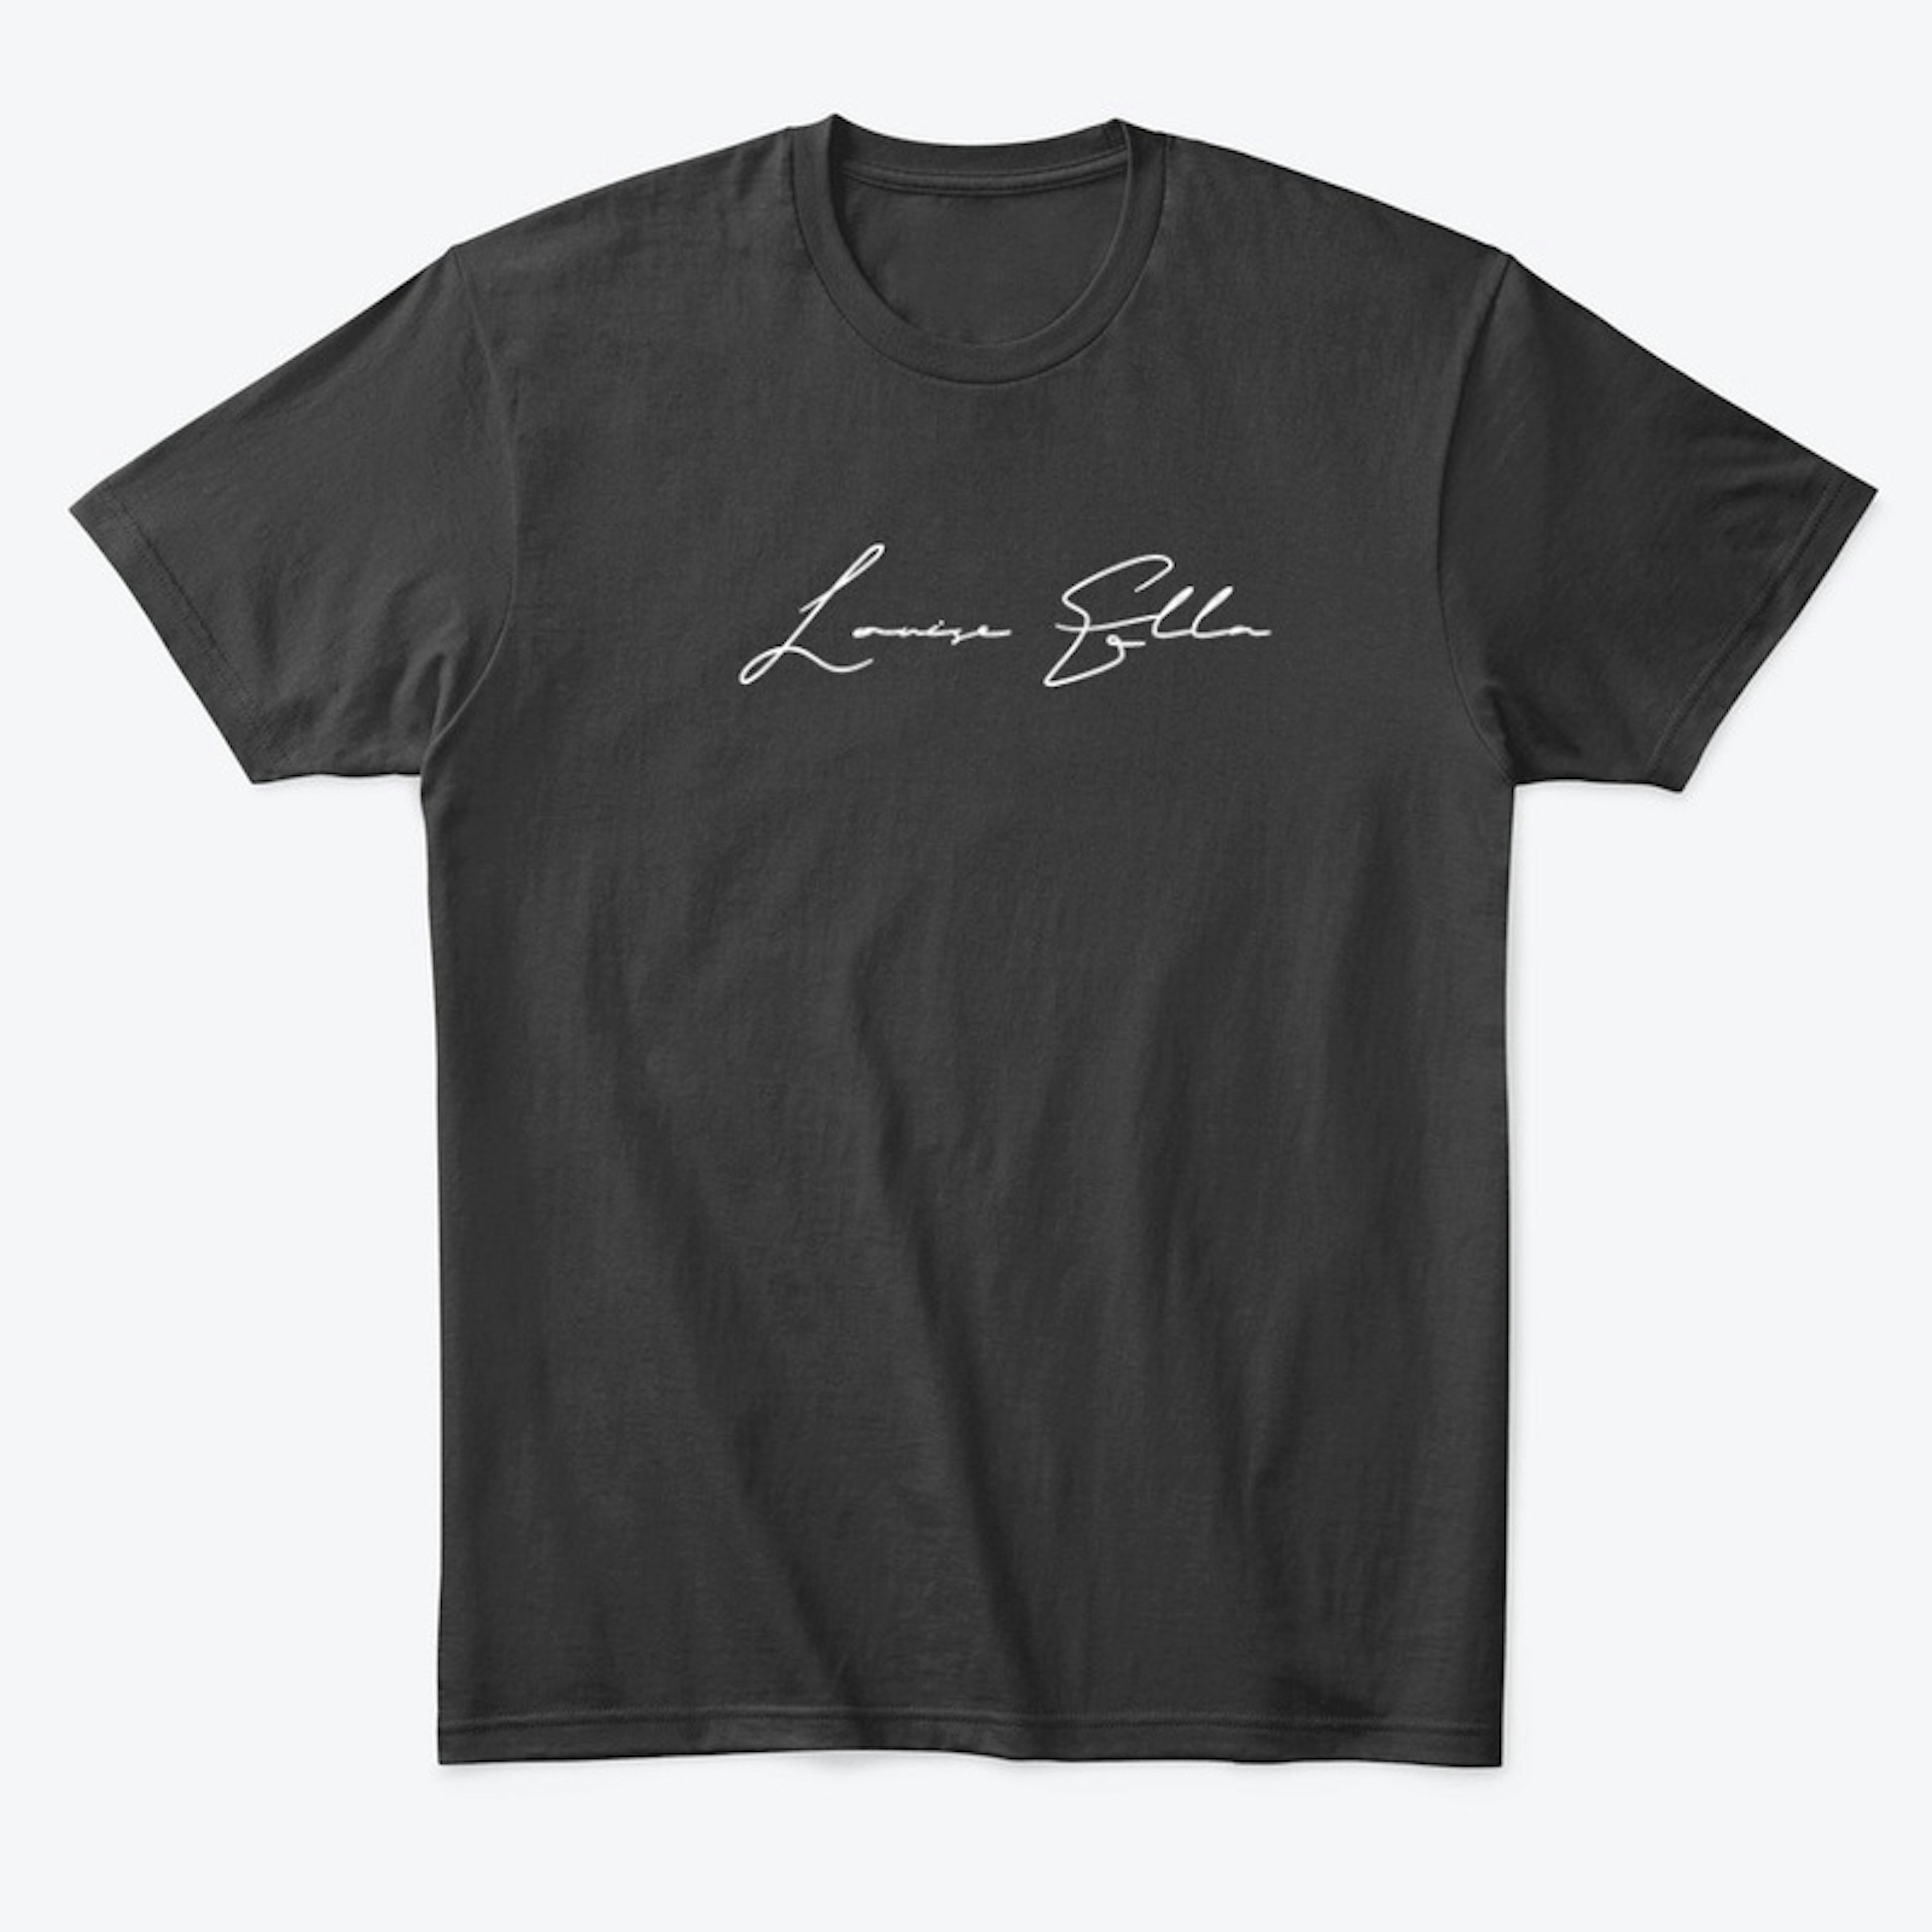 Signed LOULABELLEE T-Shirt